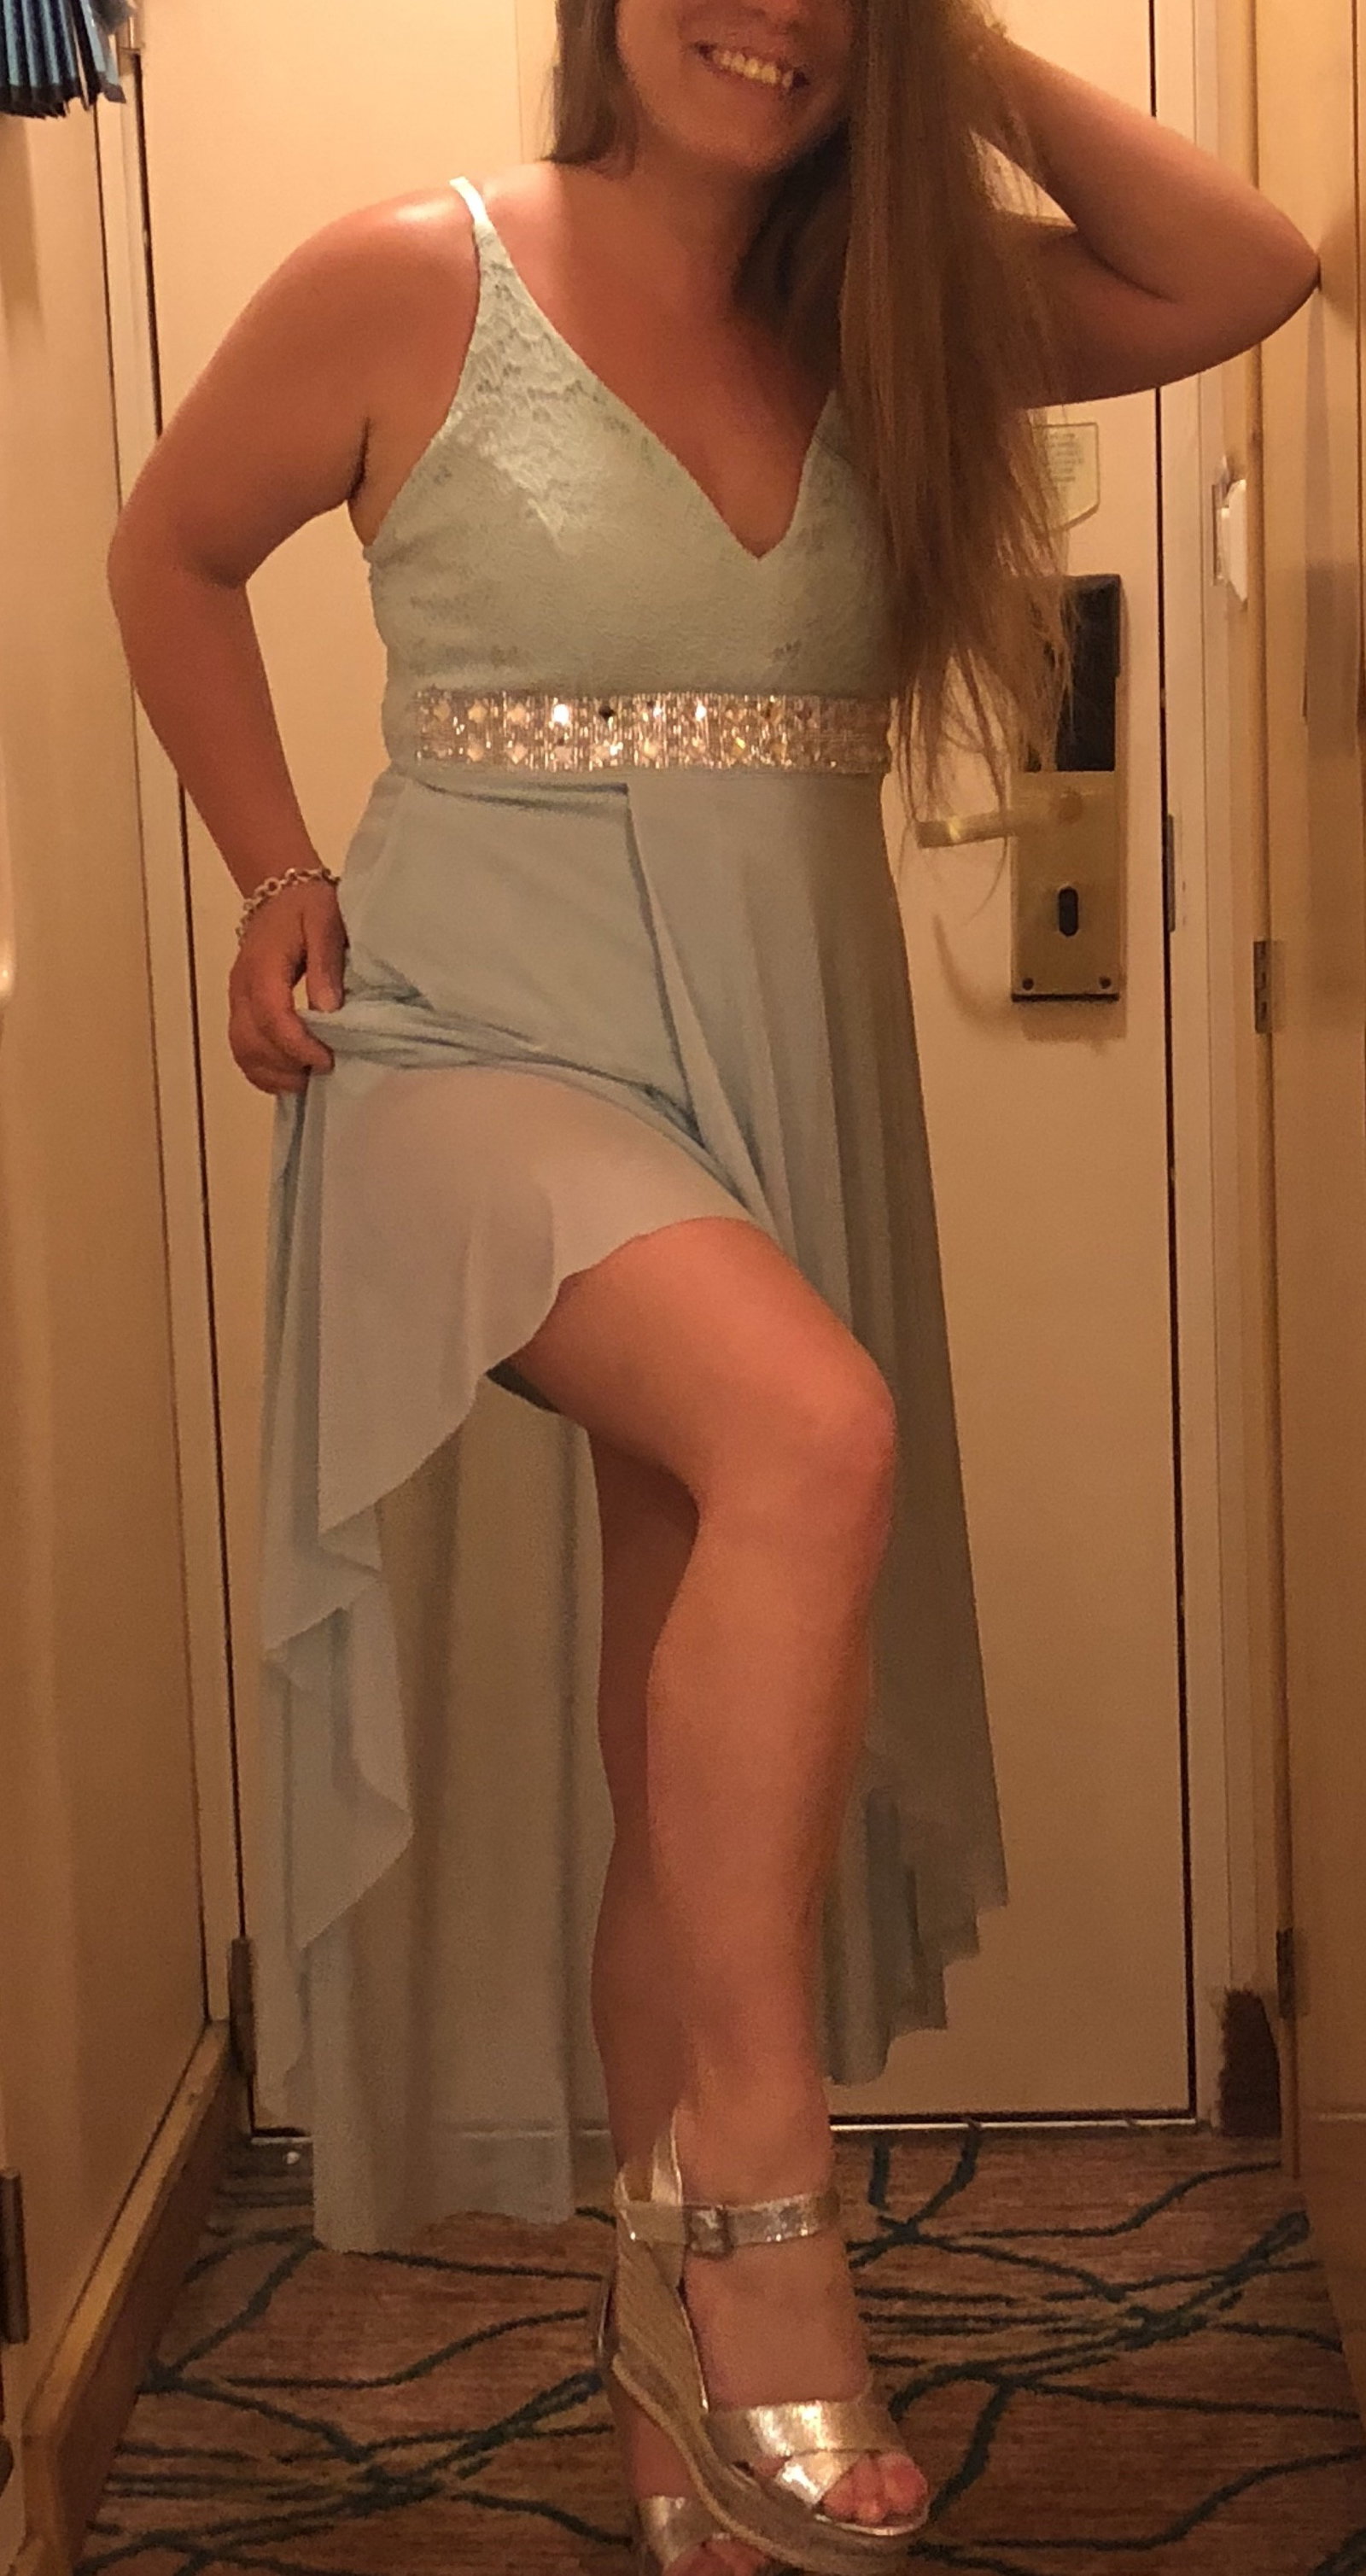 Photo by Shifty1588 with the username @Shifty1588,  December 3, 2019 at 7:30 PM. The post is about the topic Amateurs and the text says 'who wants to pull this dress up and leave her full of cum to bring back to me?!?'